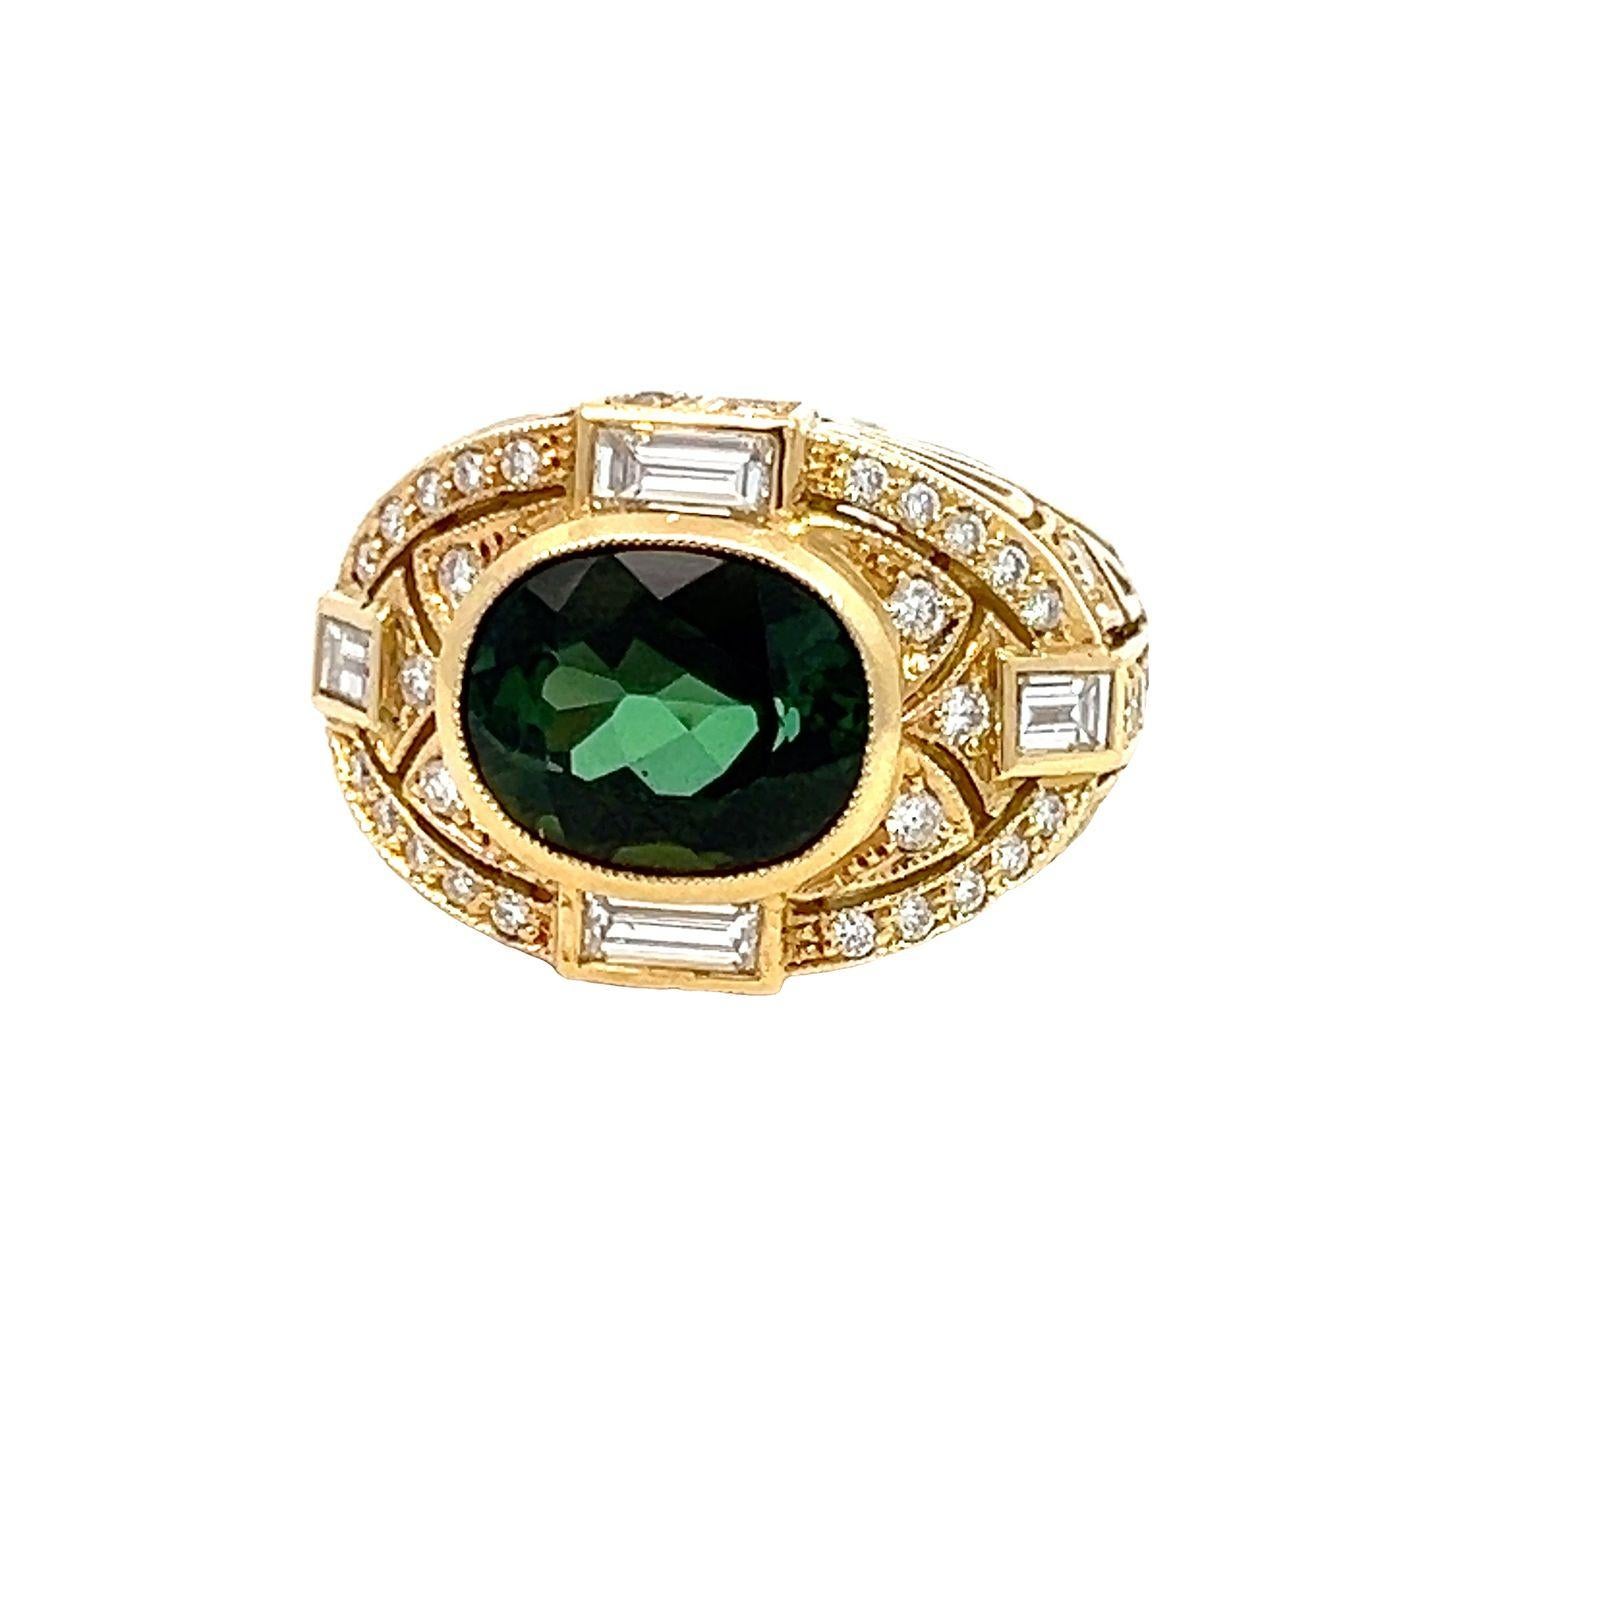 18k Yellow Gold PEPI Diamond Cocktail and Dome Ring,  a stunning fusion of retro allure and contemporary sophistication. Crafted in the 1990s style, this ring boasts a commanding presence, highlighted by its mesmerizing oval green tourmaline